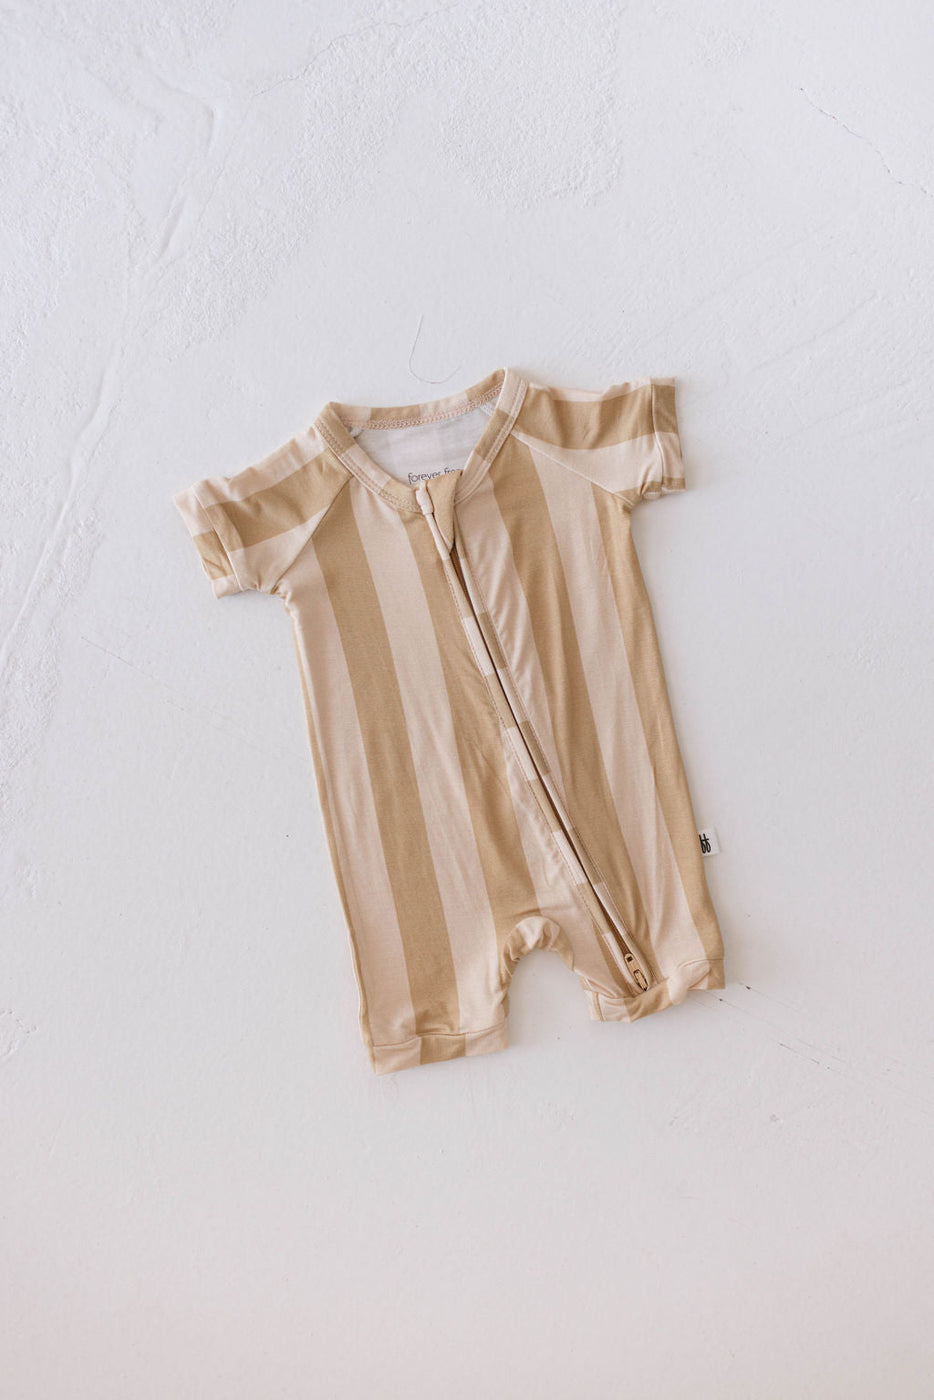 a baby romper on a white surface